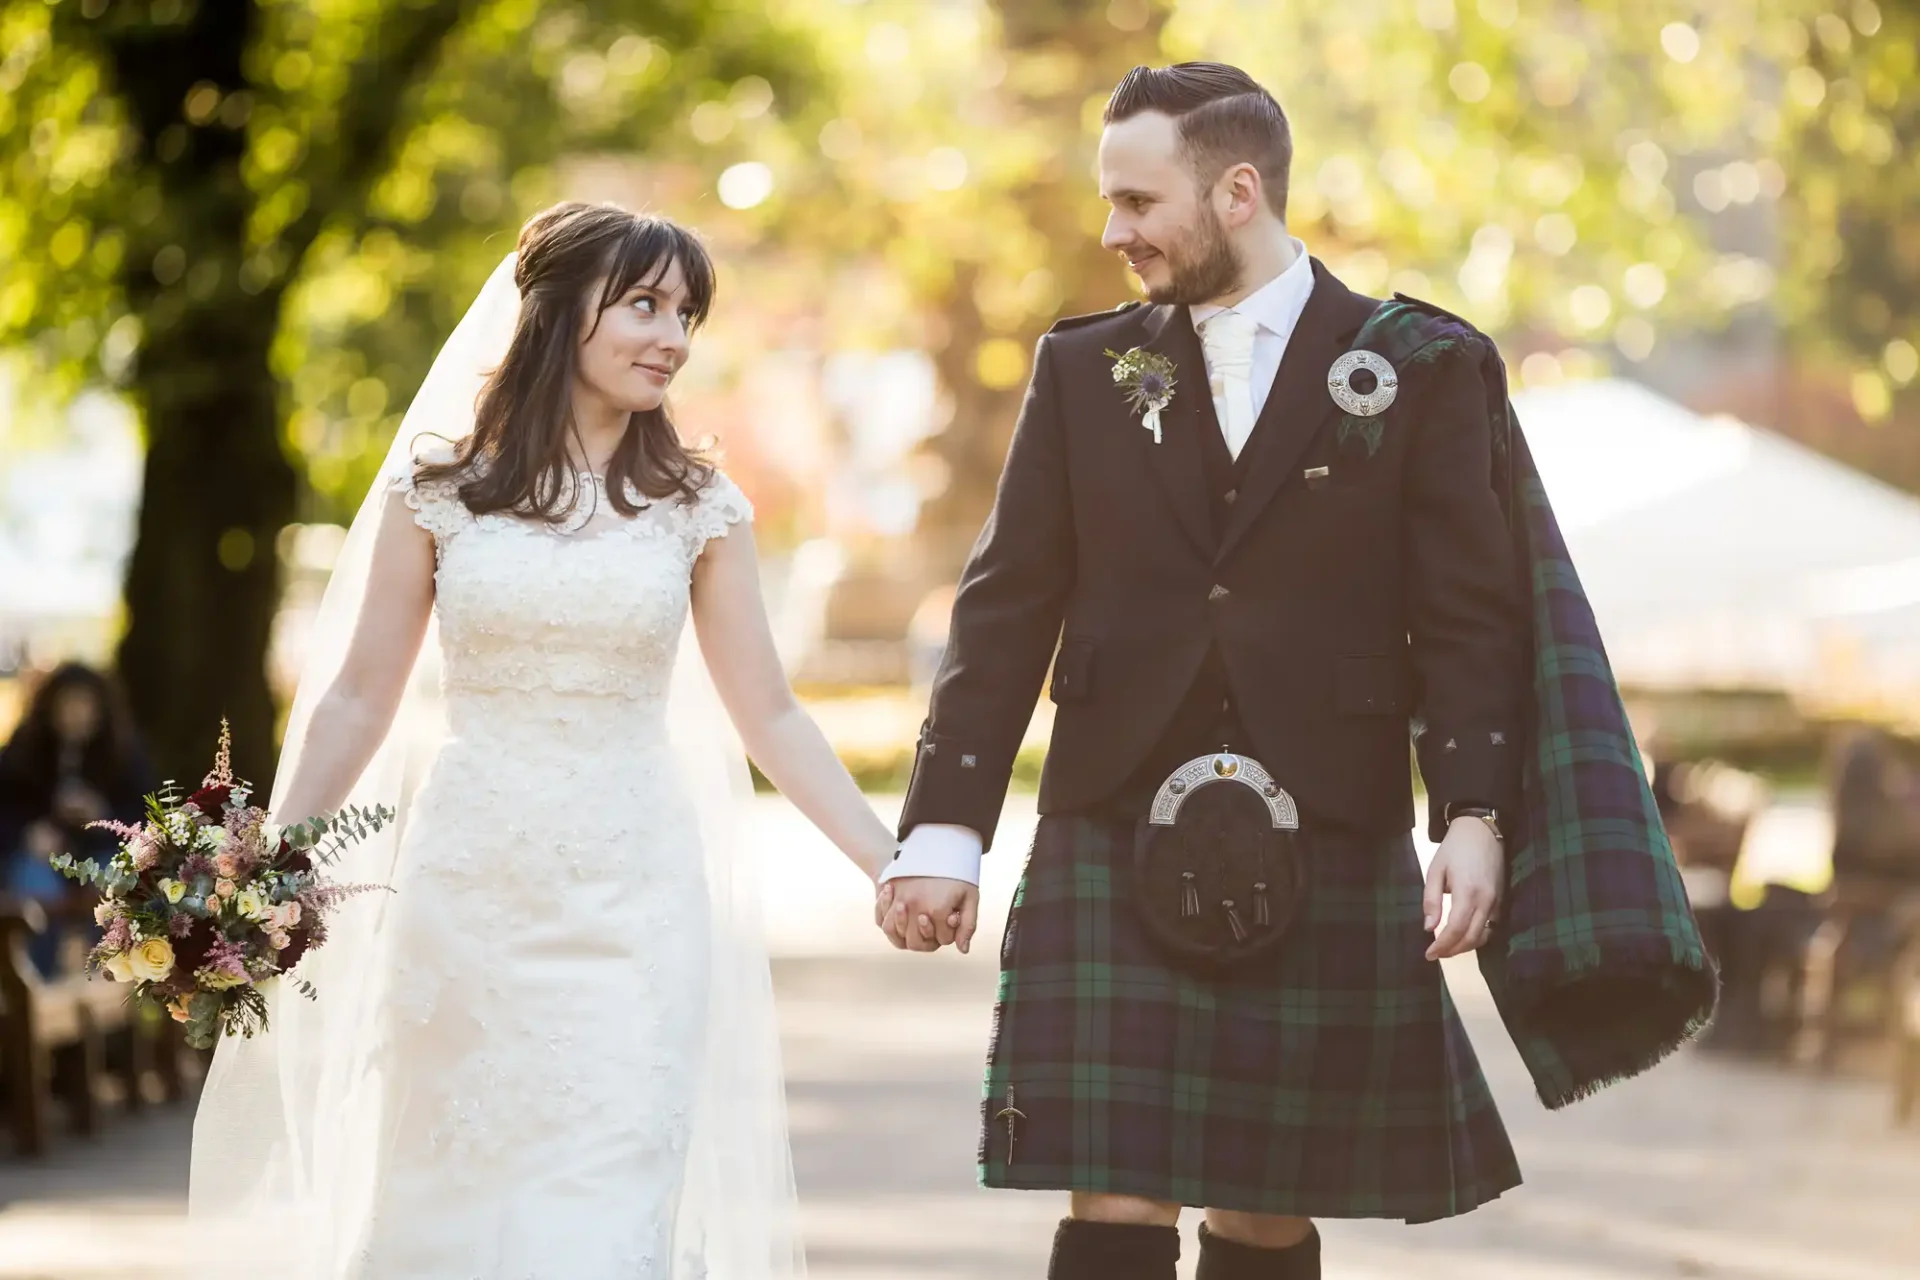 A bride and groom holding hands, walking down a park path; the groom wears a kilt, and the bride is in a lace dress.